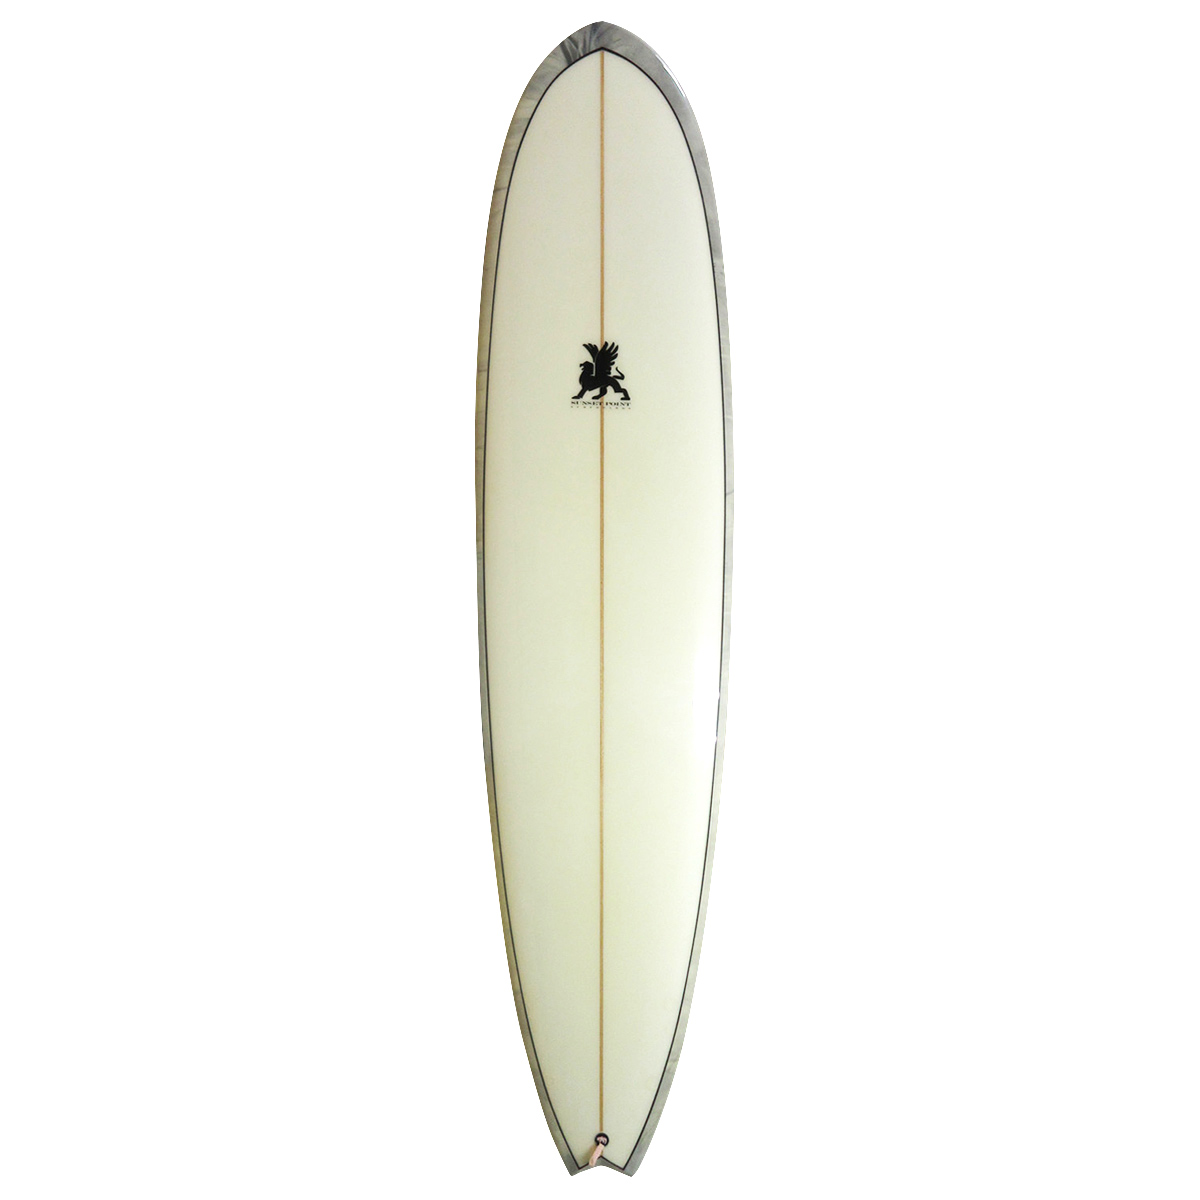 SUNSET POINT SURFBOARDS / Mini Long 8`0 shaped by Greg Griffin